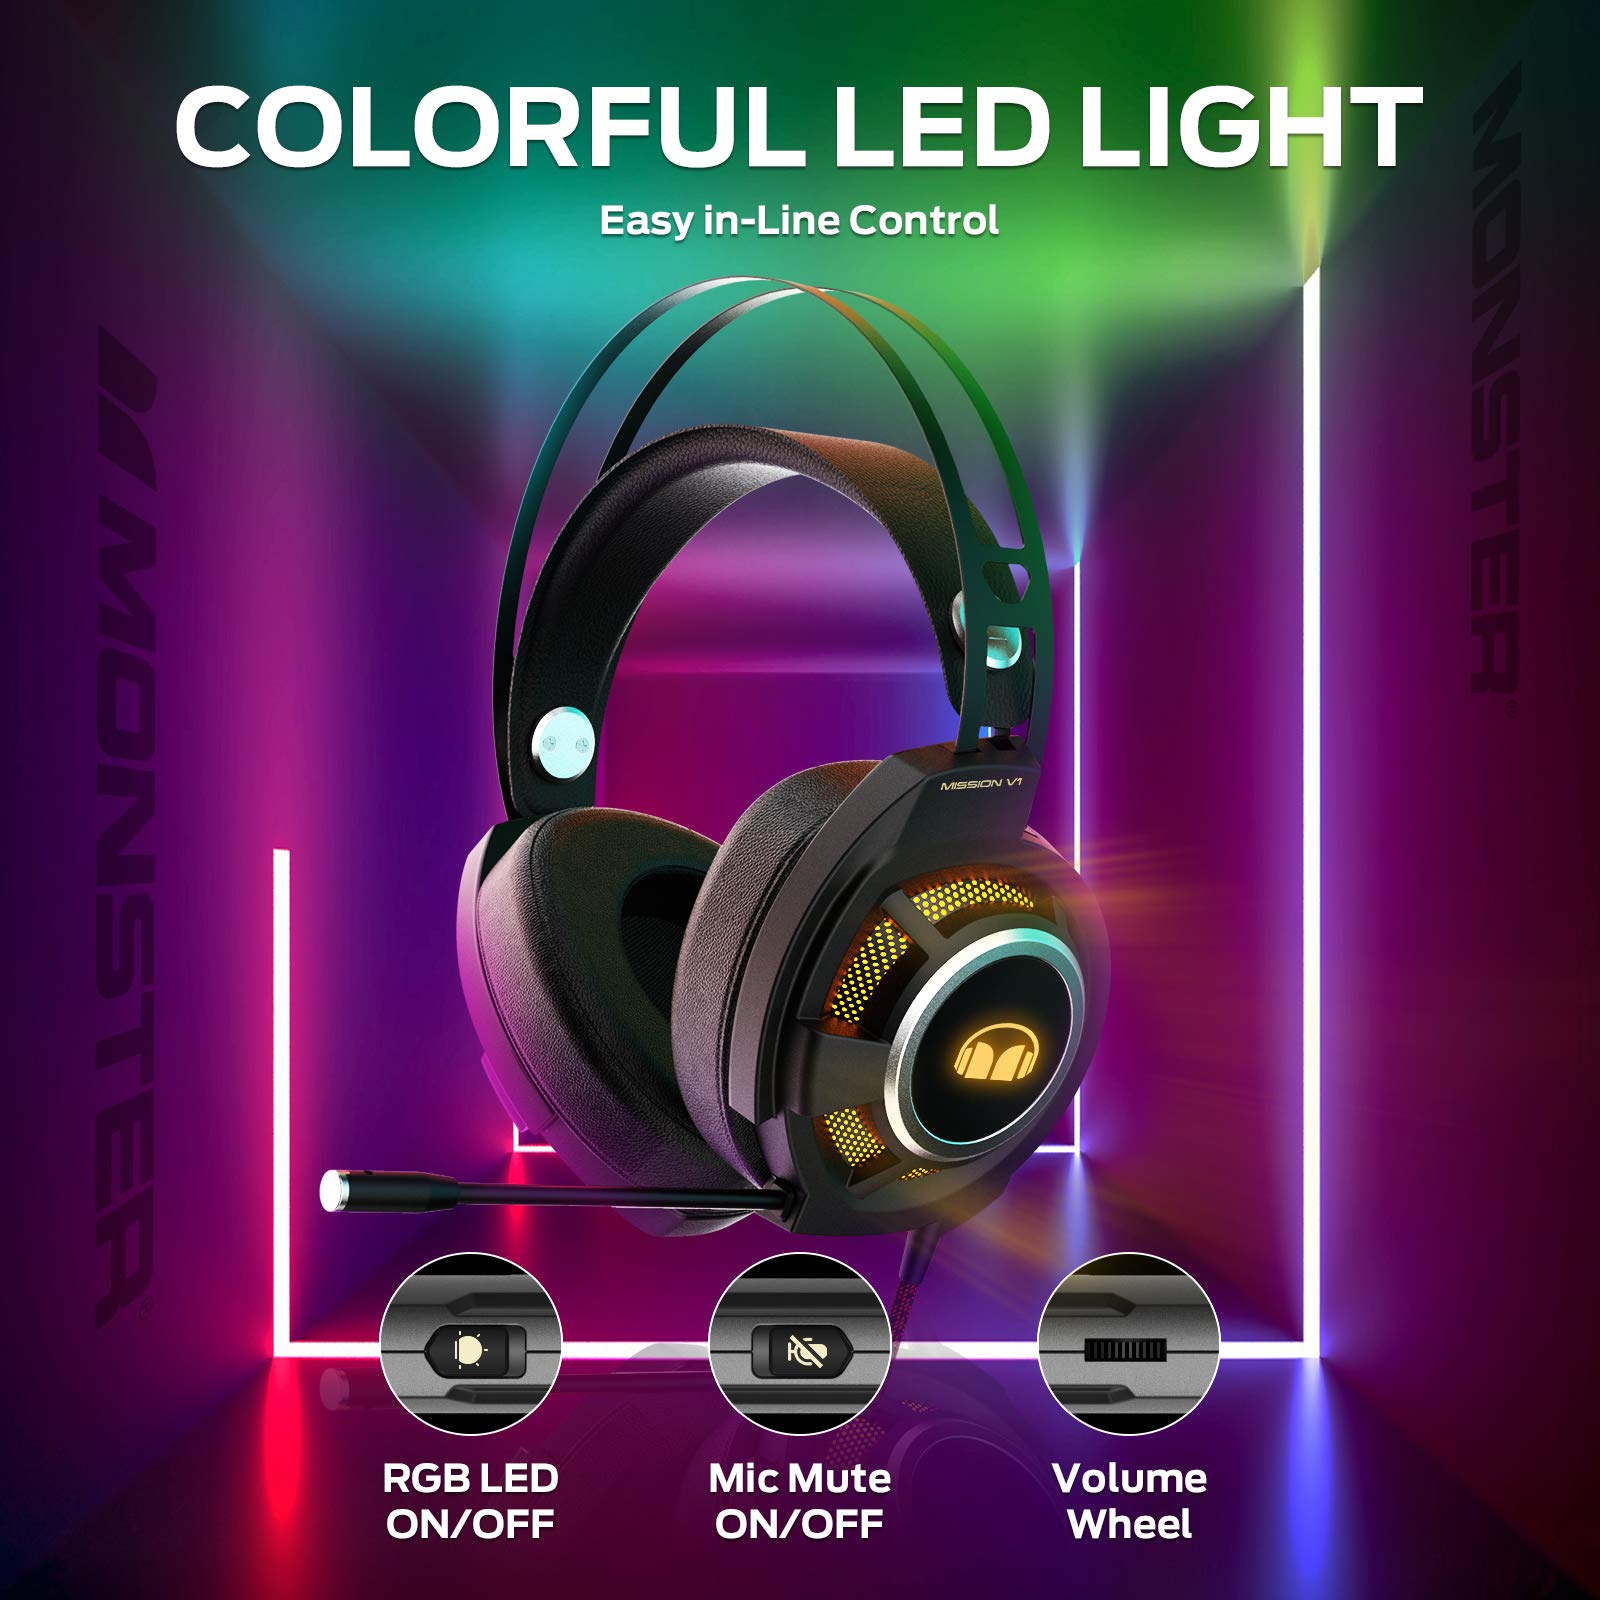 Monster Mission V1 Gaming Headset, Over-Ear Gaming Headphone with Noise Cancelling Mic, Surround Sound Stereo, Adaptive Suspension Head Beam, Colorful RGB Light, Compatible with PC/Mac/PS4/Xbox One…